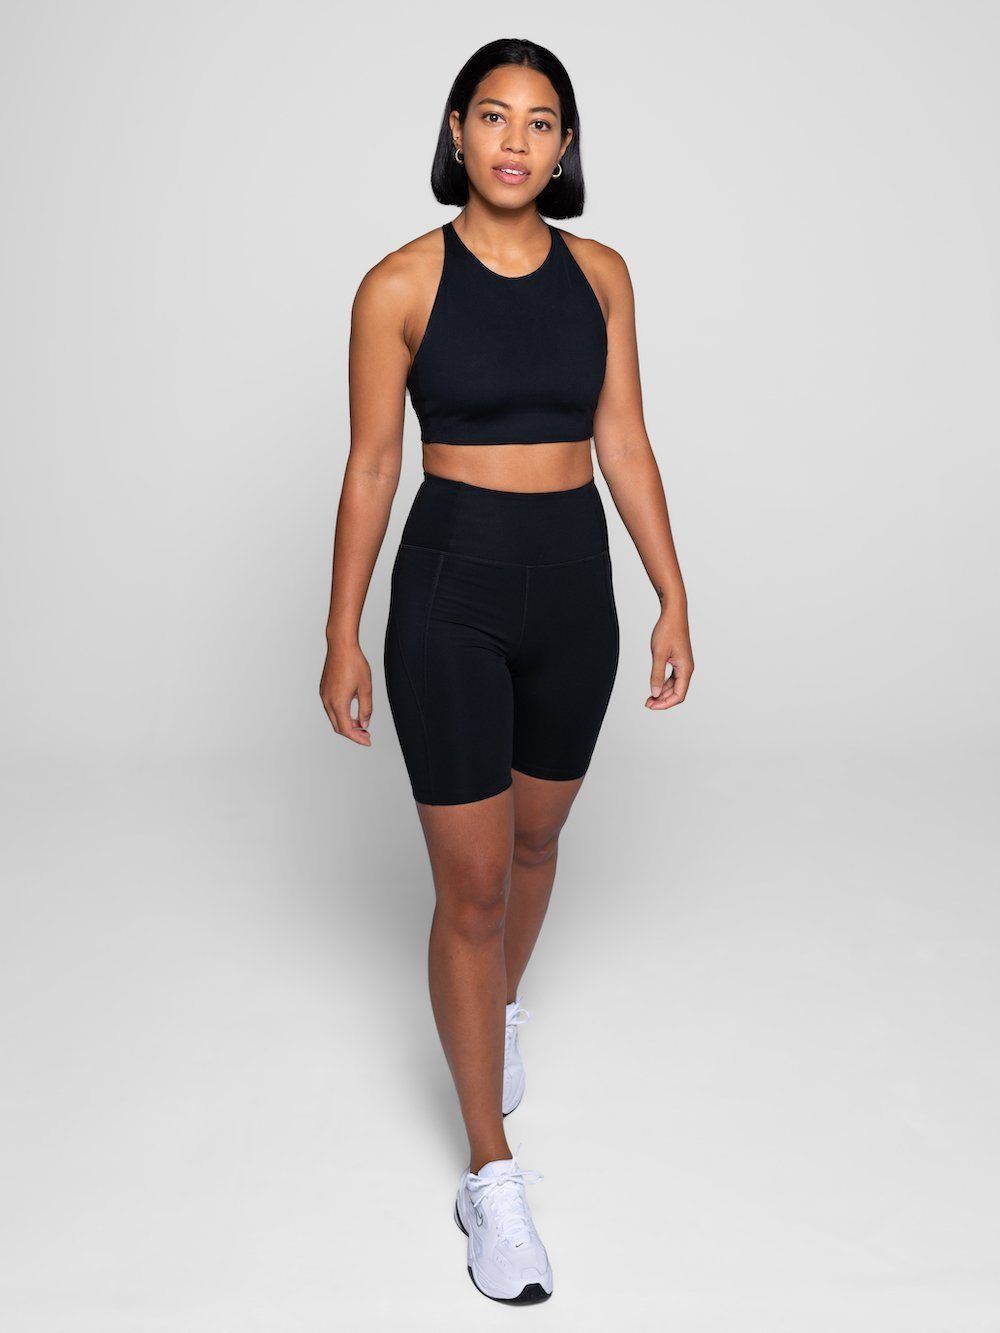 Girlfriend Collective Topanga sports Bra - Made from recycled plastic bottles Black Underwear